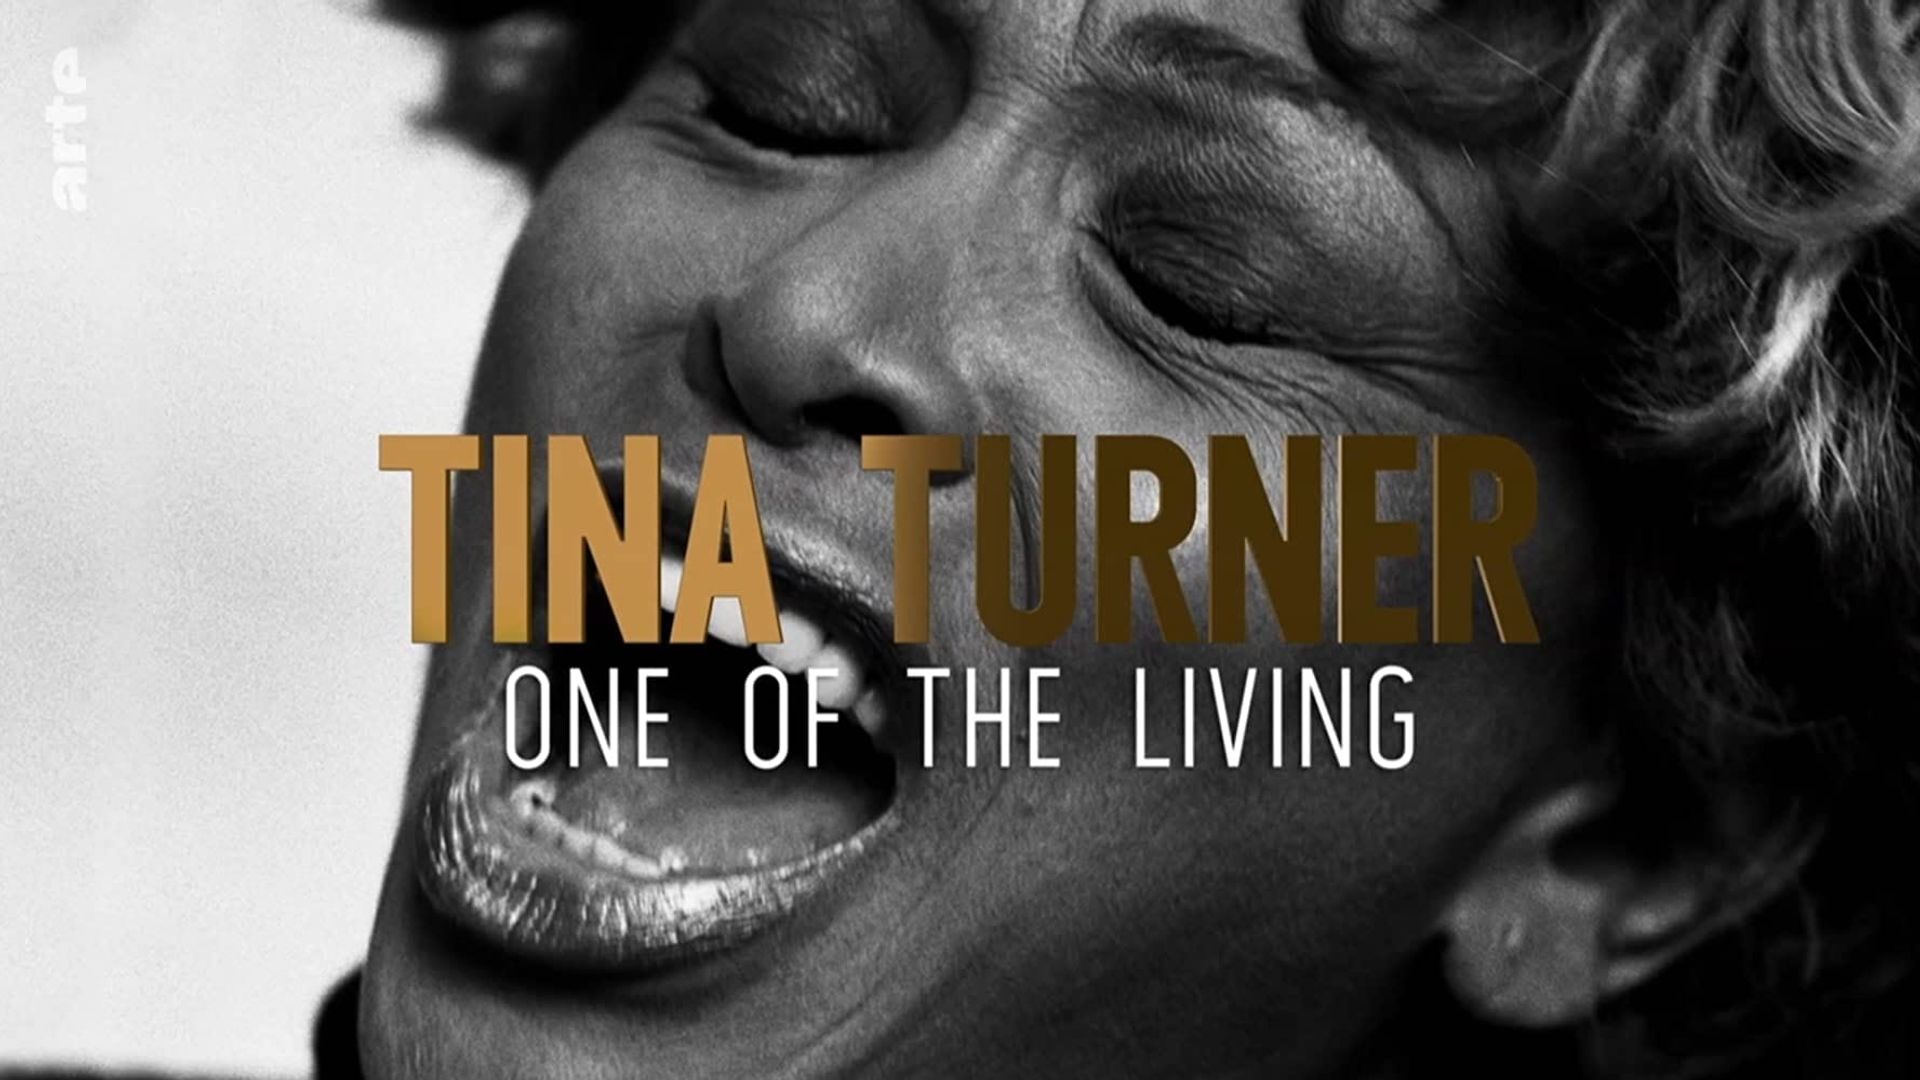 Tina Turner: One of the Living background